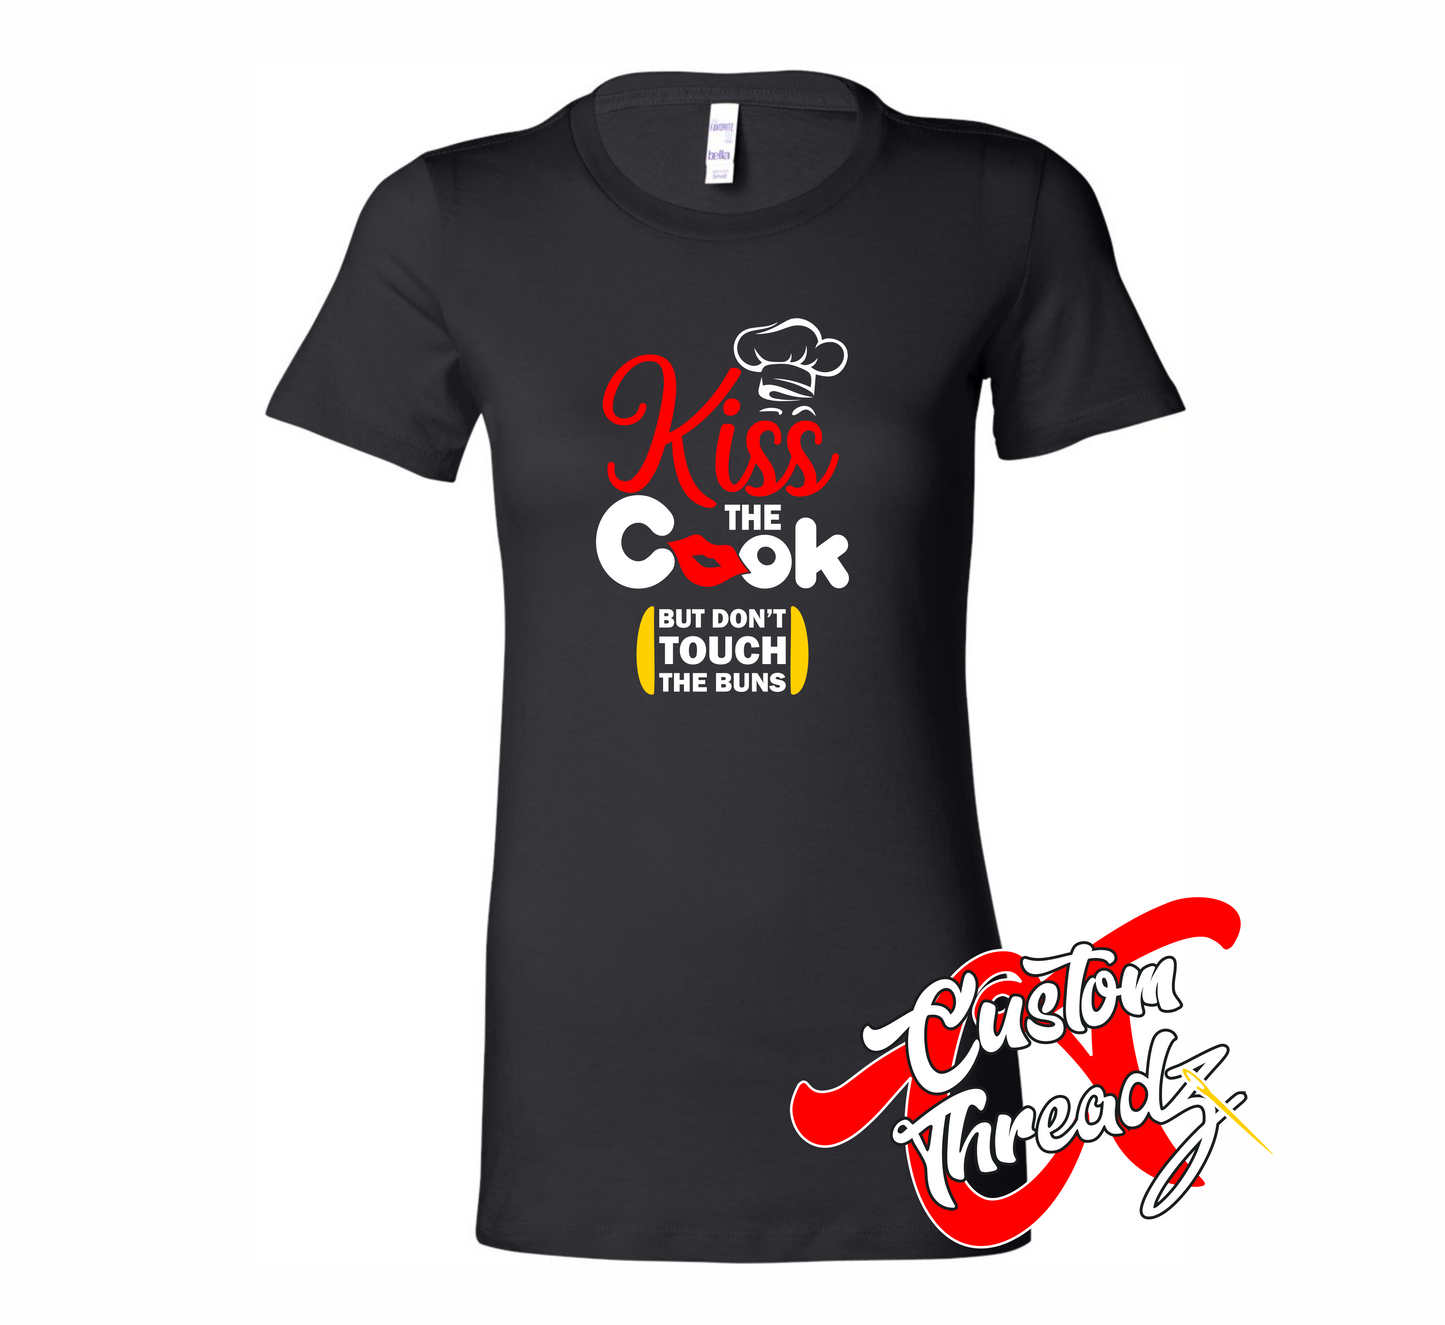 black womens tee with kiss the cook but dont touch the buns DTG printed design